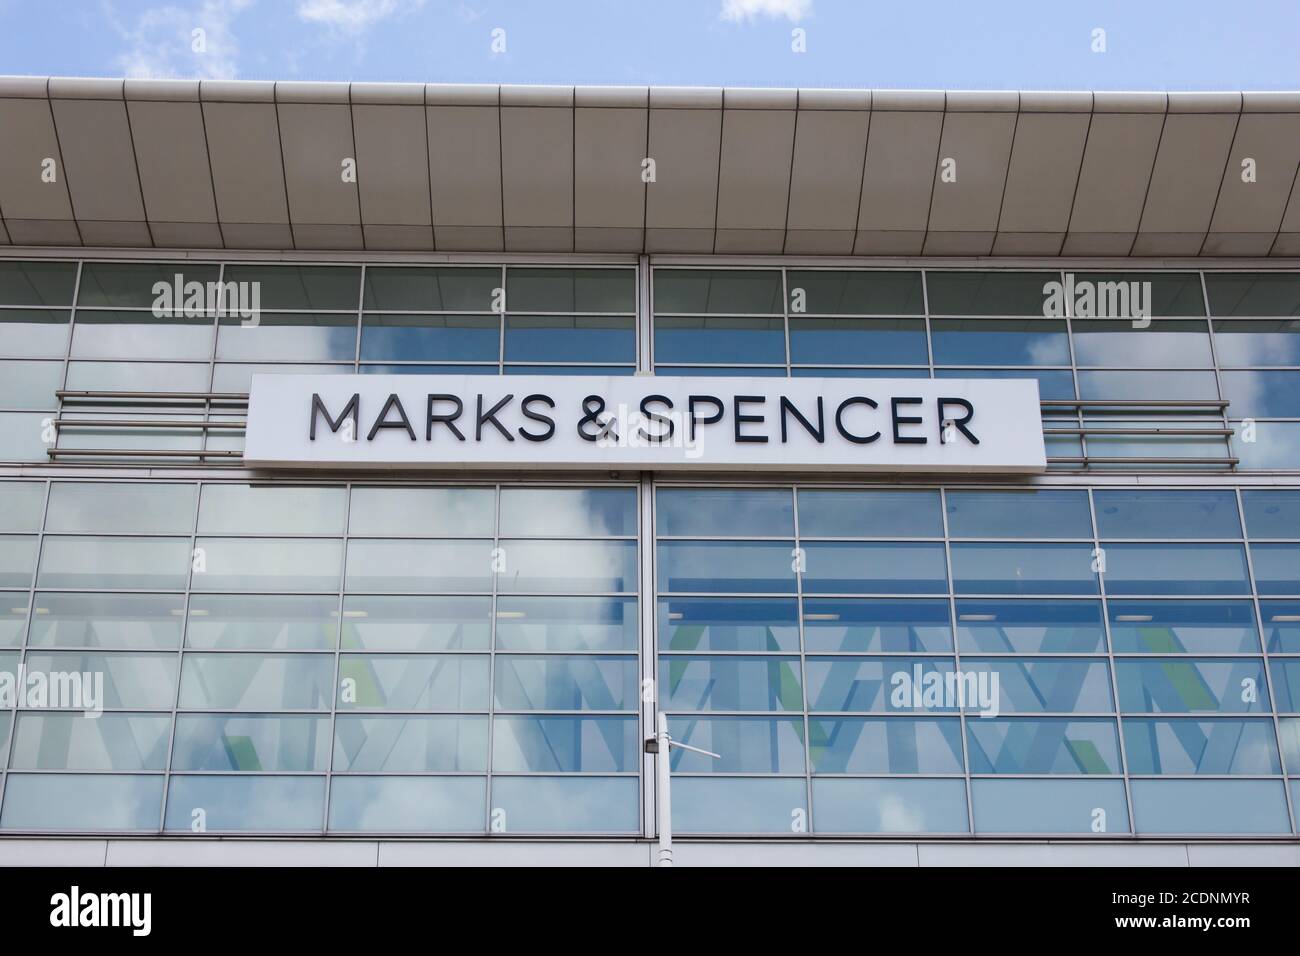 Southampton, Hampshire, UK 07 10 2020 The Marks and Spencer sign on a large glass front in Southampton, UK Stock Photo